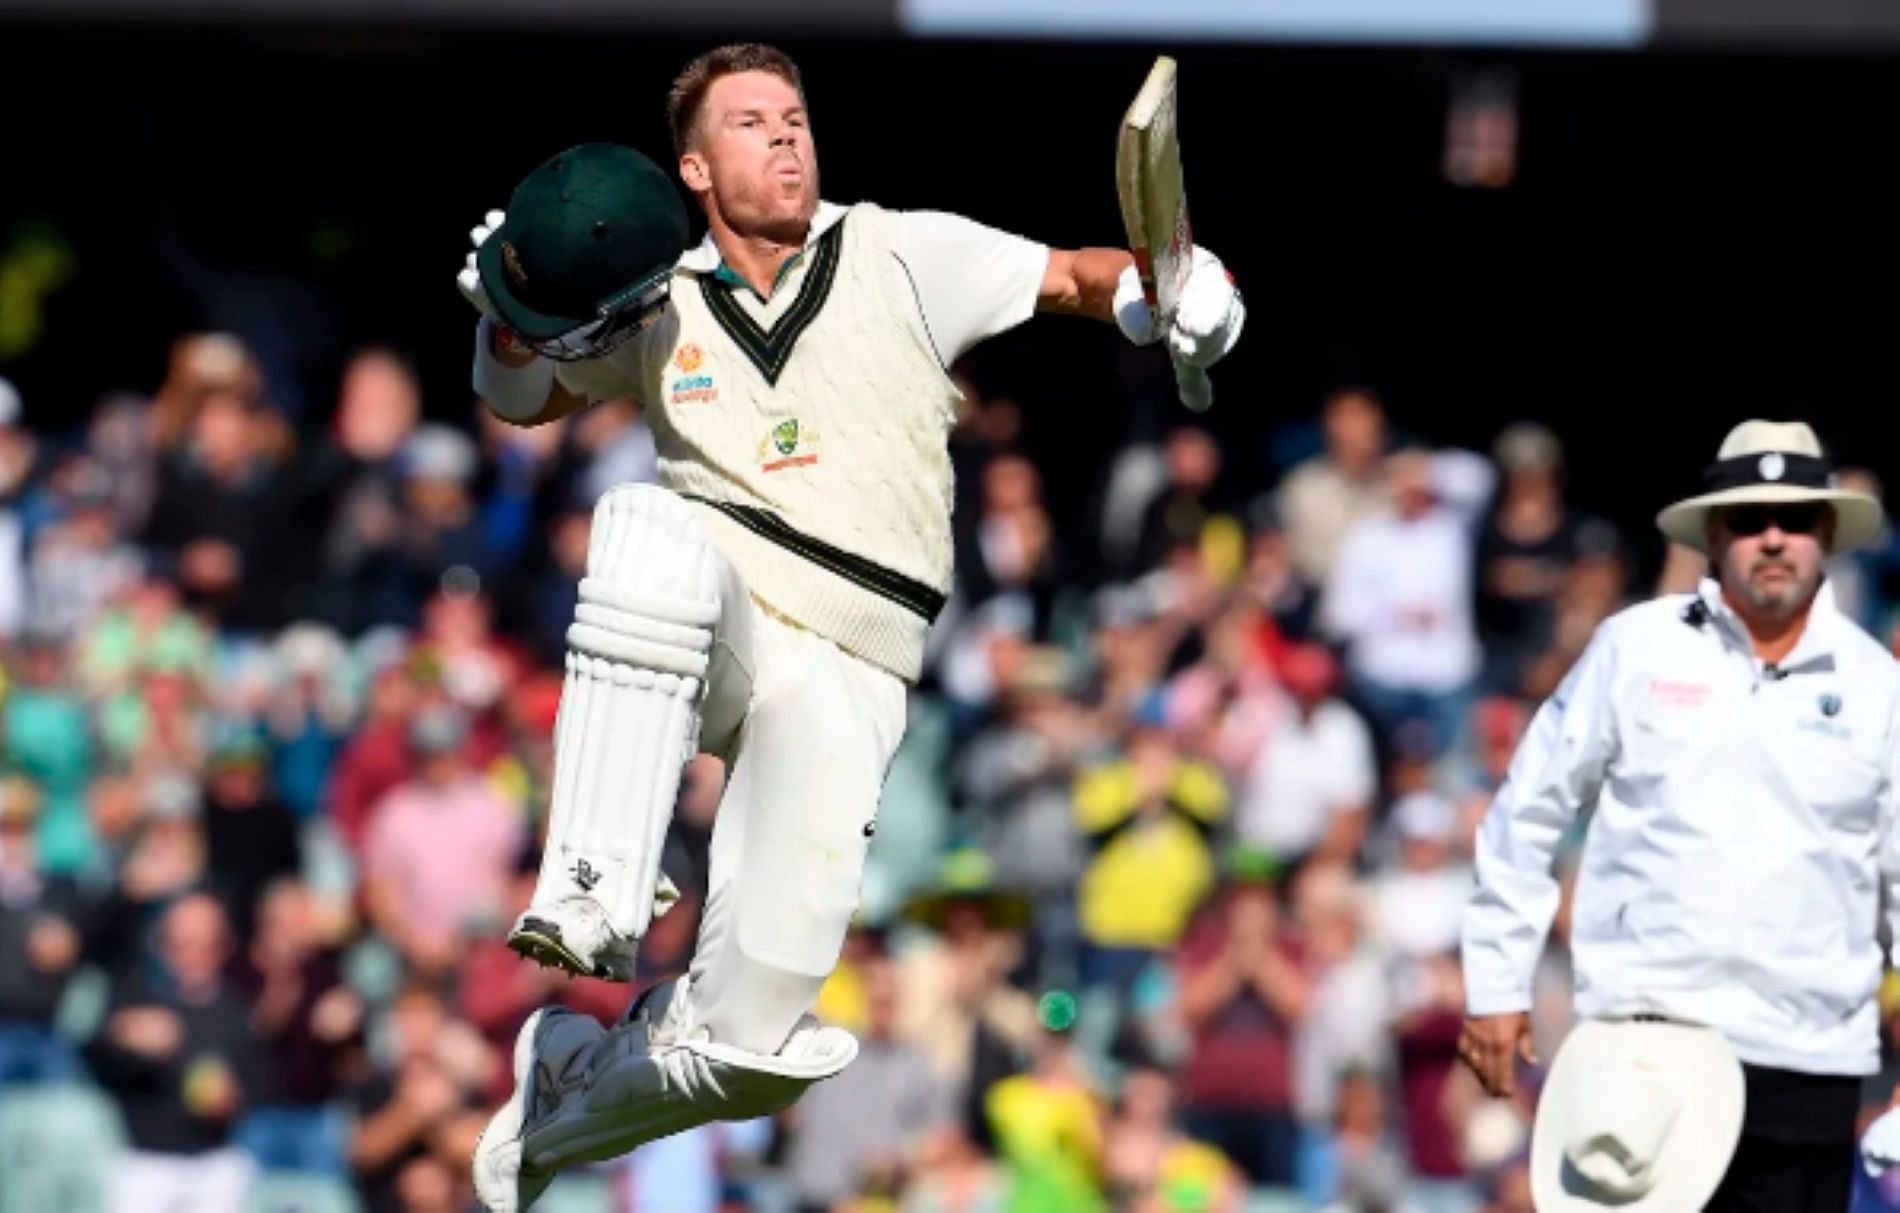 Warner scored a blistering century in the opening Test of his final series